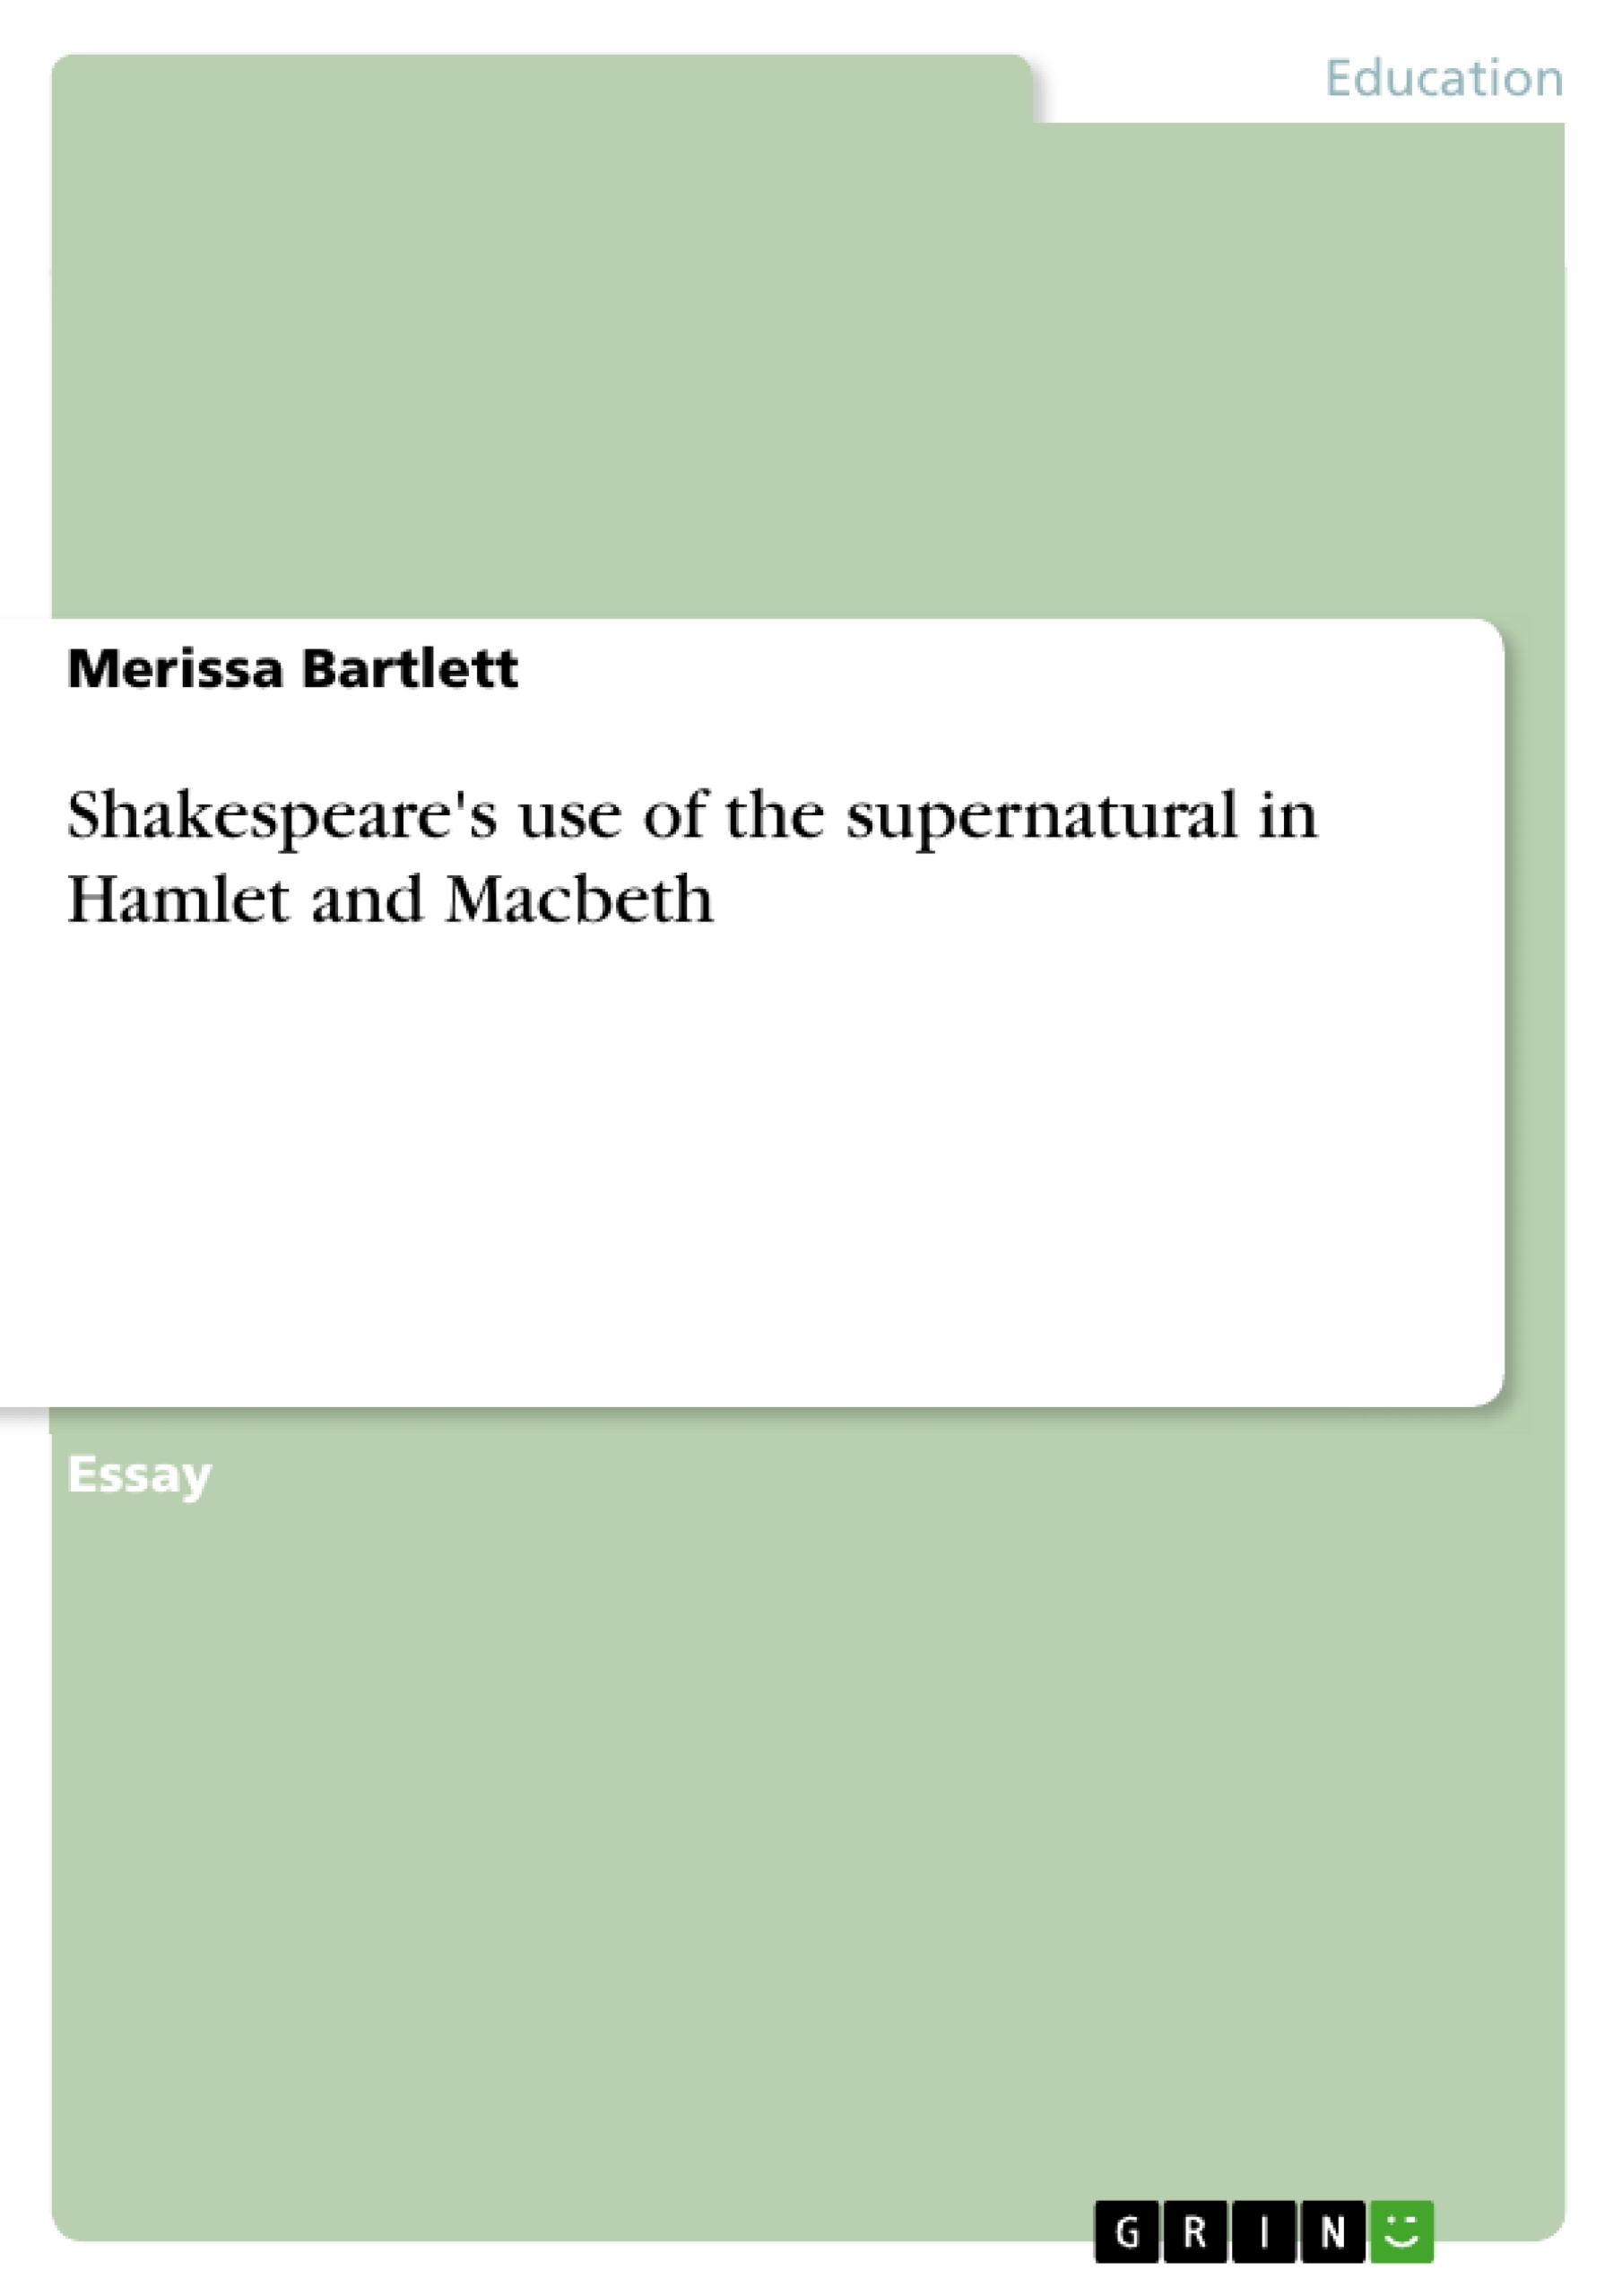 Shakespeare’s Use of the Supernatural in Macbeth Essay